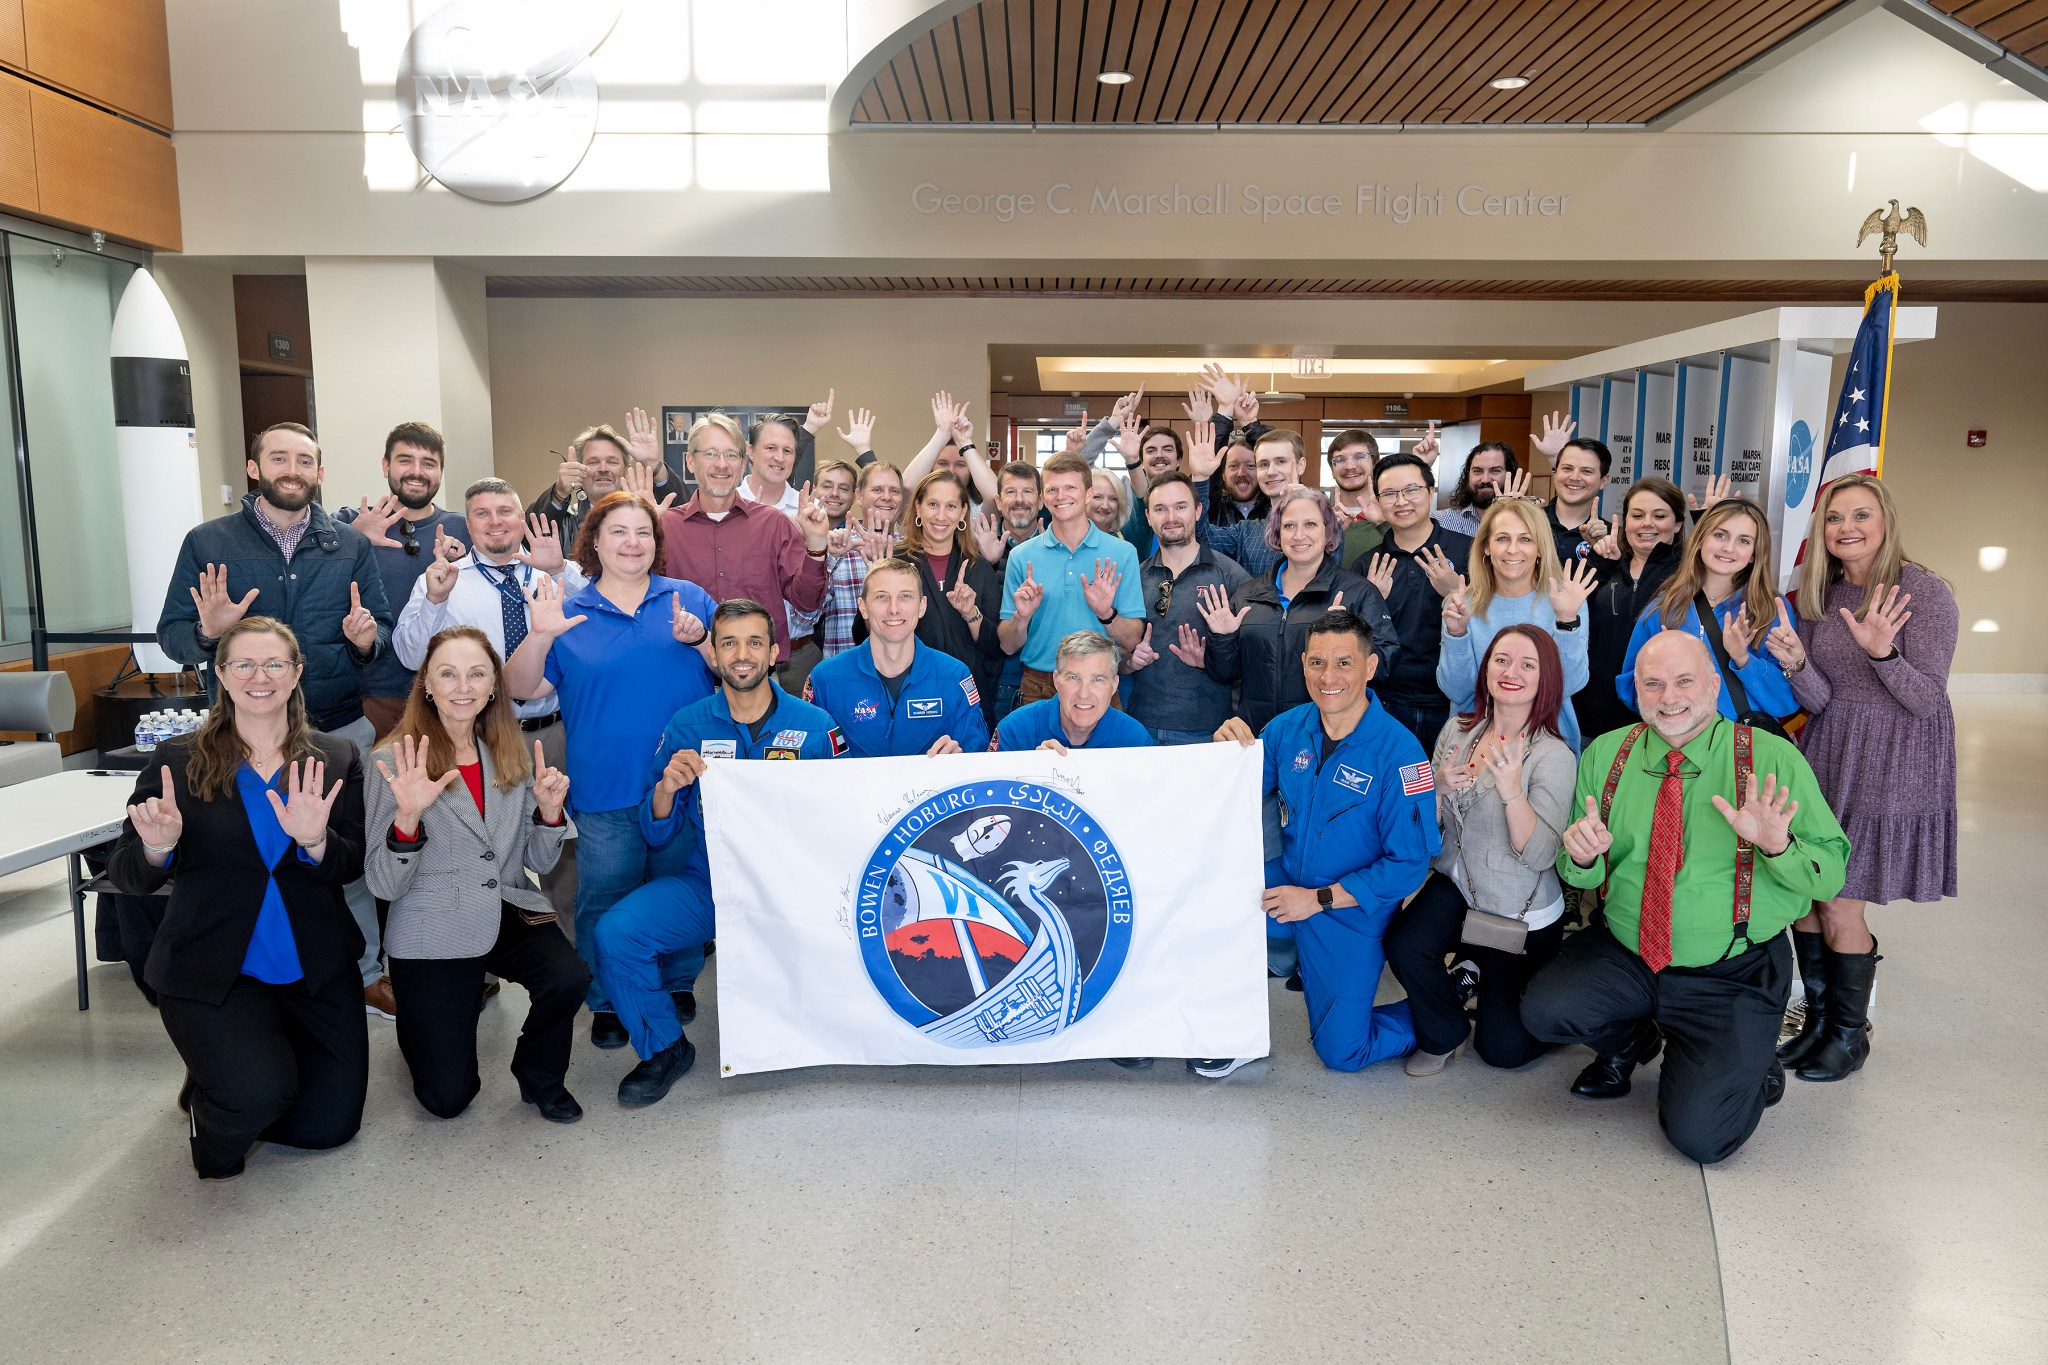 Expedition 69 Crew-6 astronauts smile and hold a banner for a photo with team members from the Human Exploration Development & Operations Office at NASA’s Marshall Space Flight Center. From left, the astronauts are Sultan Alneyadi, Steven Bowen, Warren “Woody” Hoburg, and Frank Rubio.